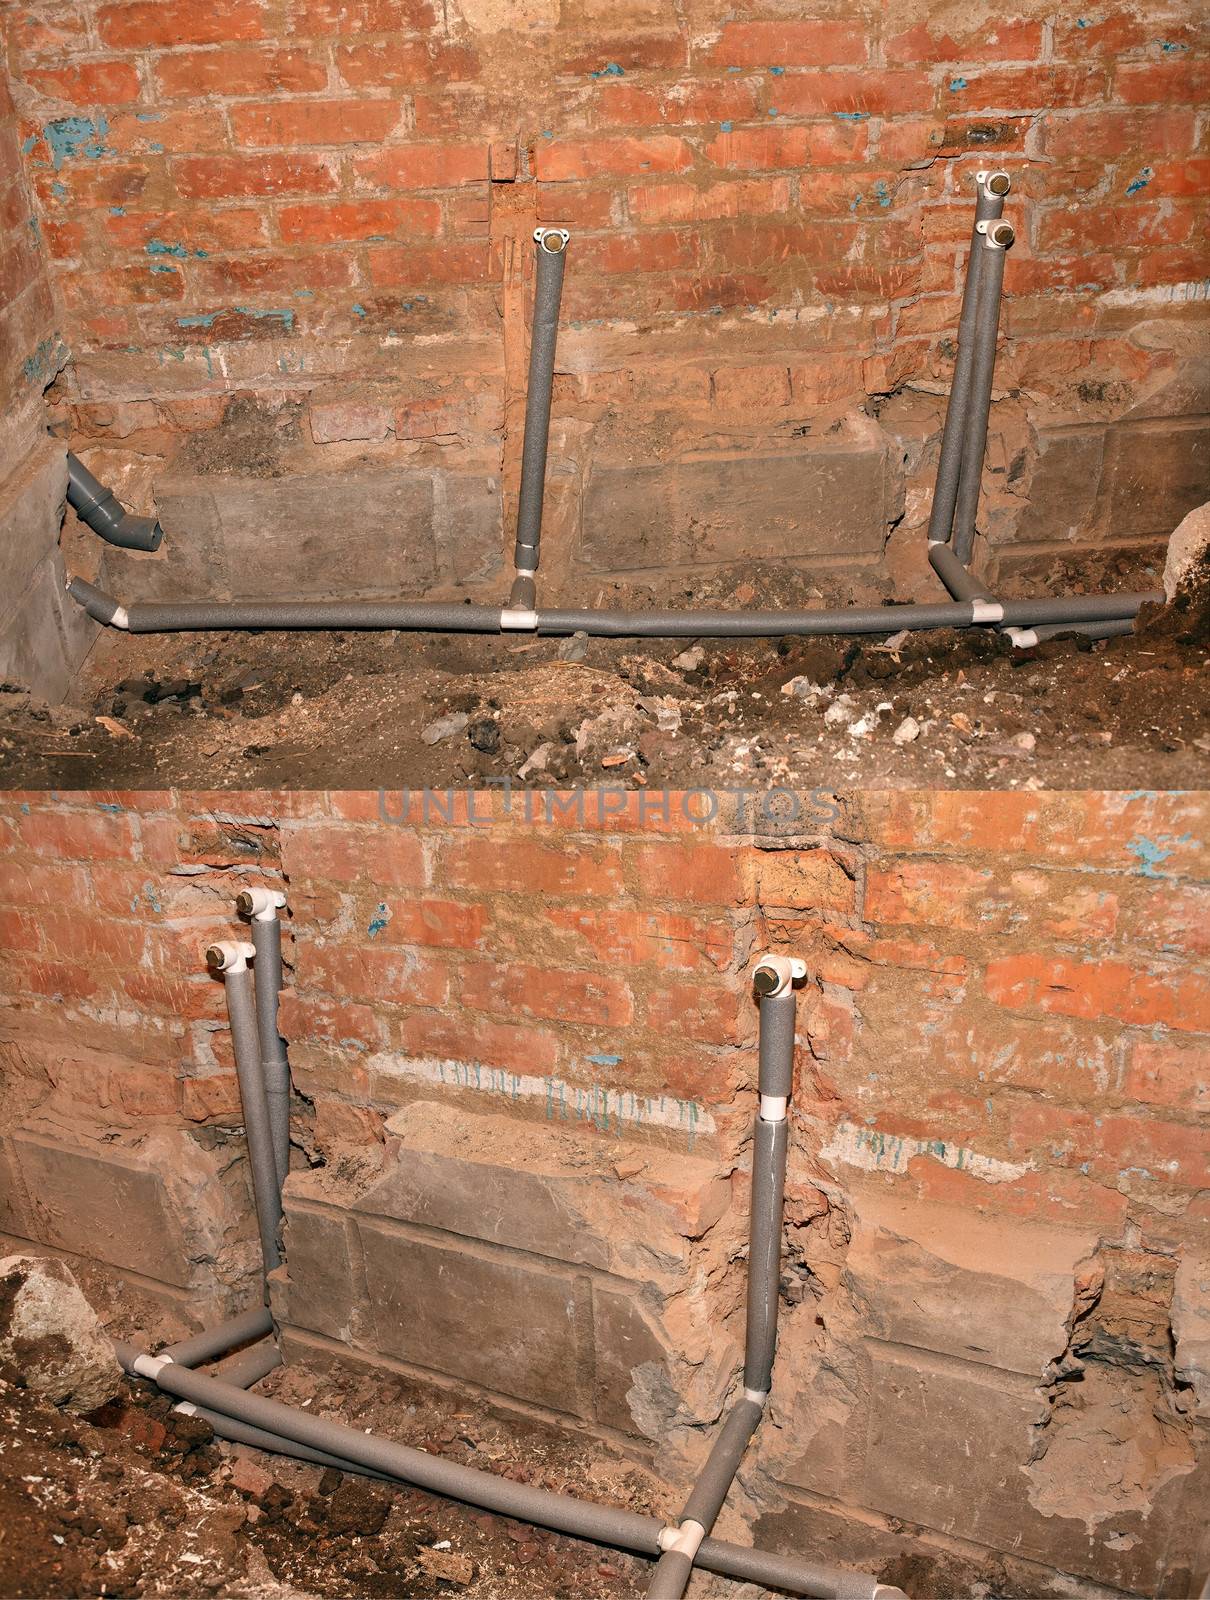 Installation of plumbing in an old residential building during renovations